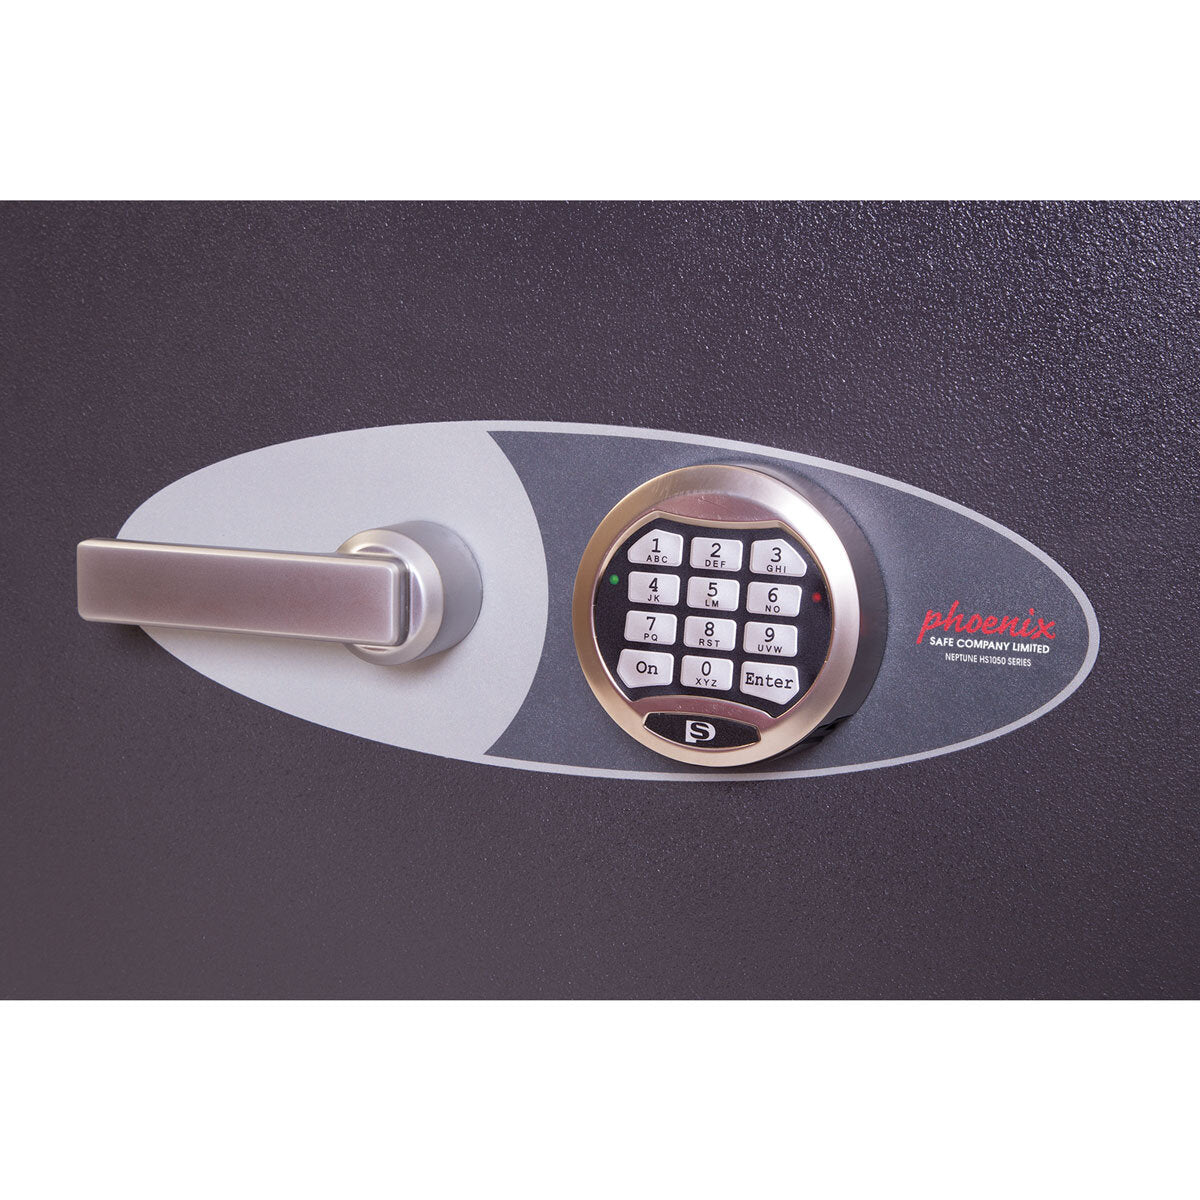 Phoenix 553 Litre Neptune HS1056E Security Safe with Electronic Lock Including Delivery and Positioning